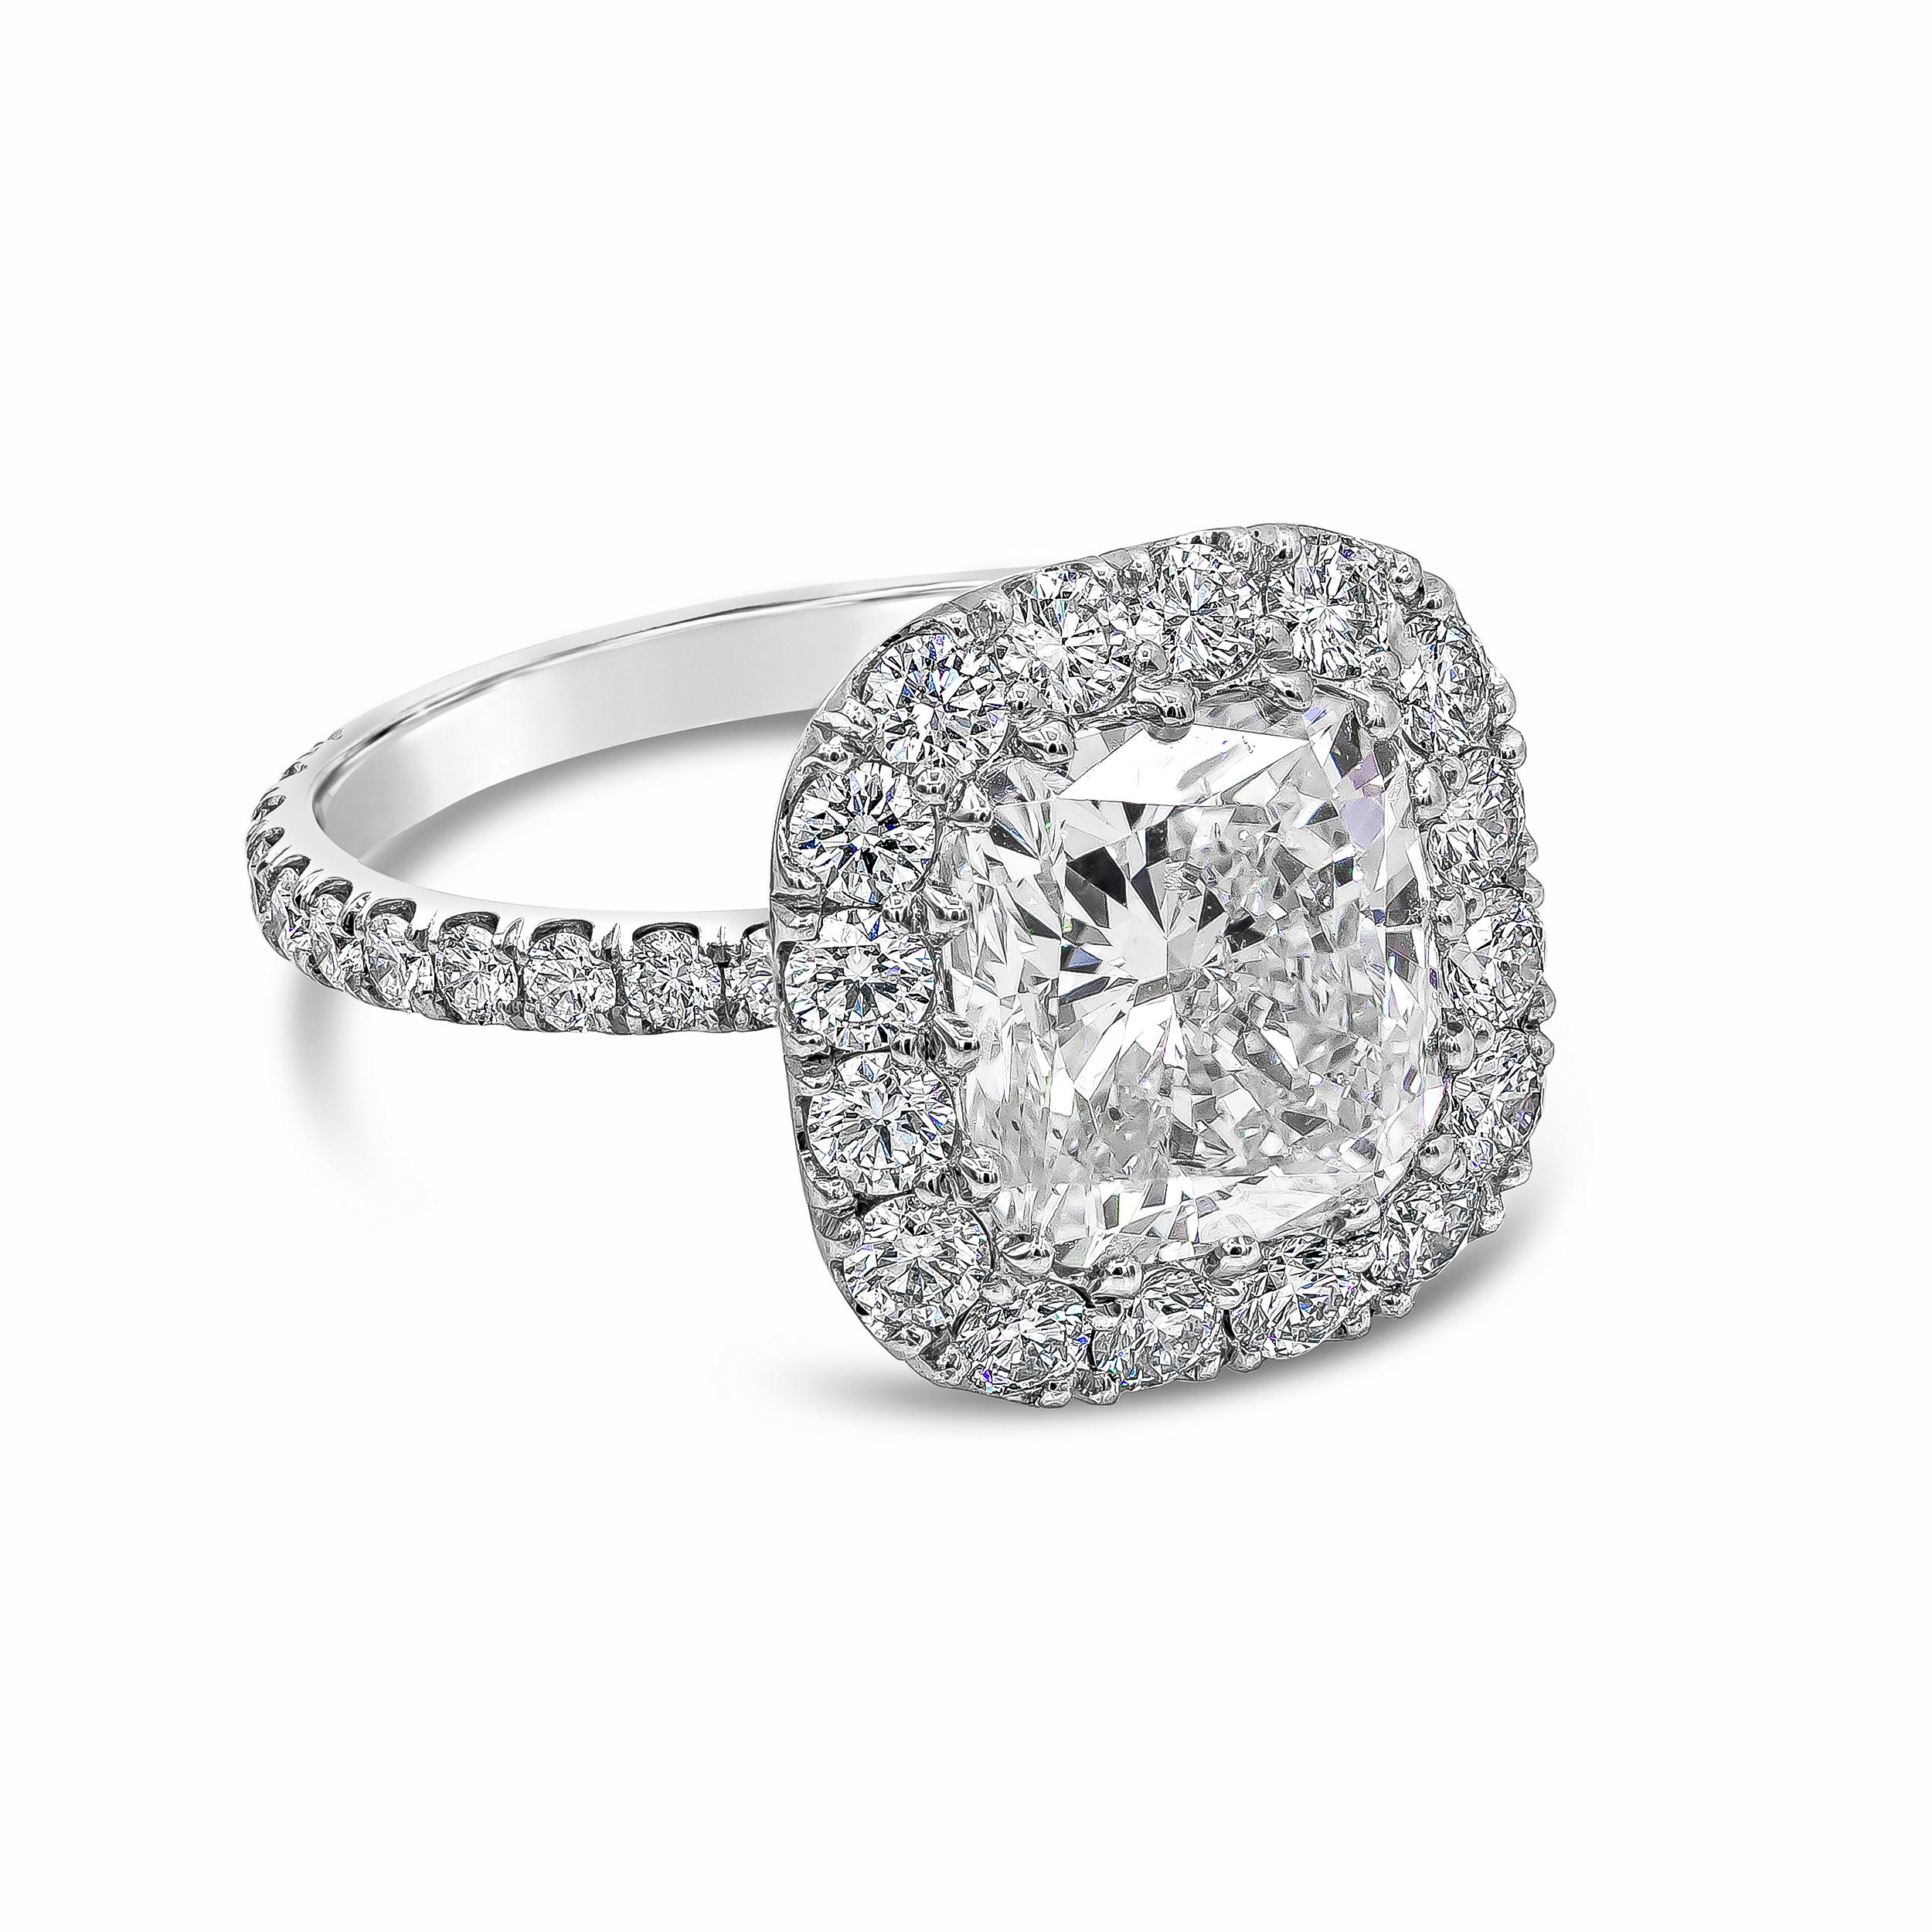 A traditional engagement ring style showcasing a 3.70 carat cushion cut diamond, embellished with a single row of round brilliant diamonds. Set in a platinum mounting set with diamonds. Accent diamonds weigh 1.43 carats total.

GIA G-SI2

Style